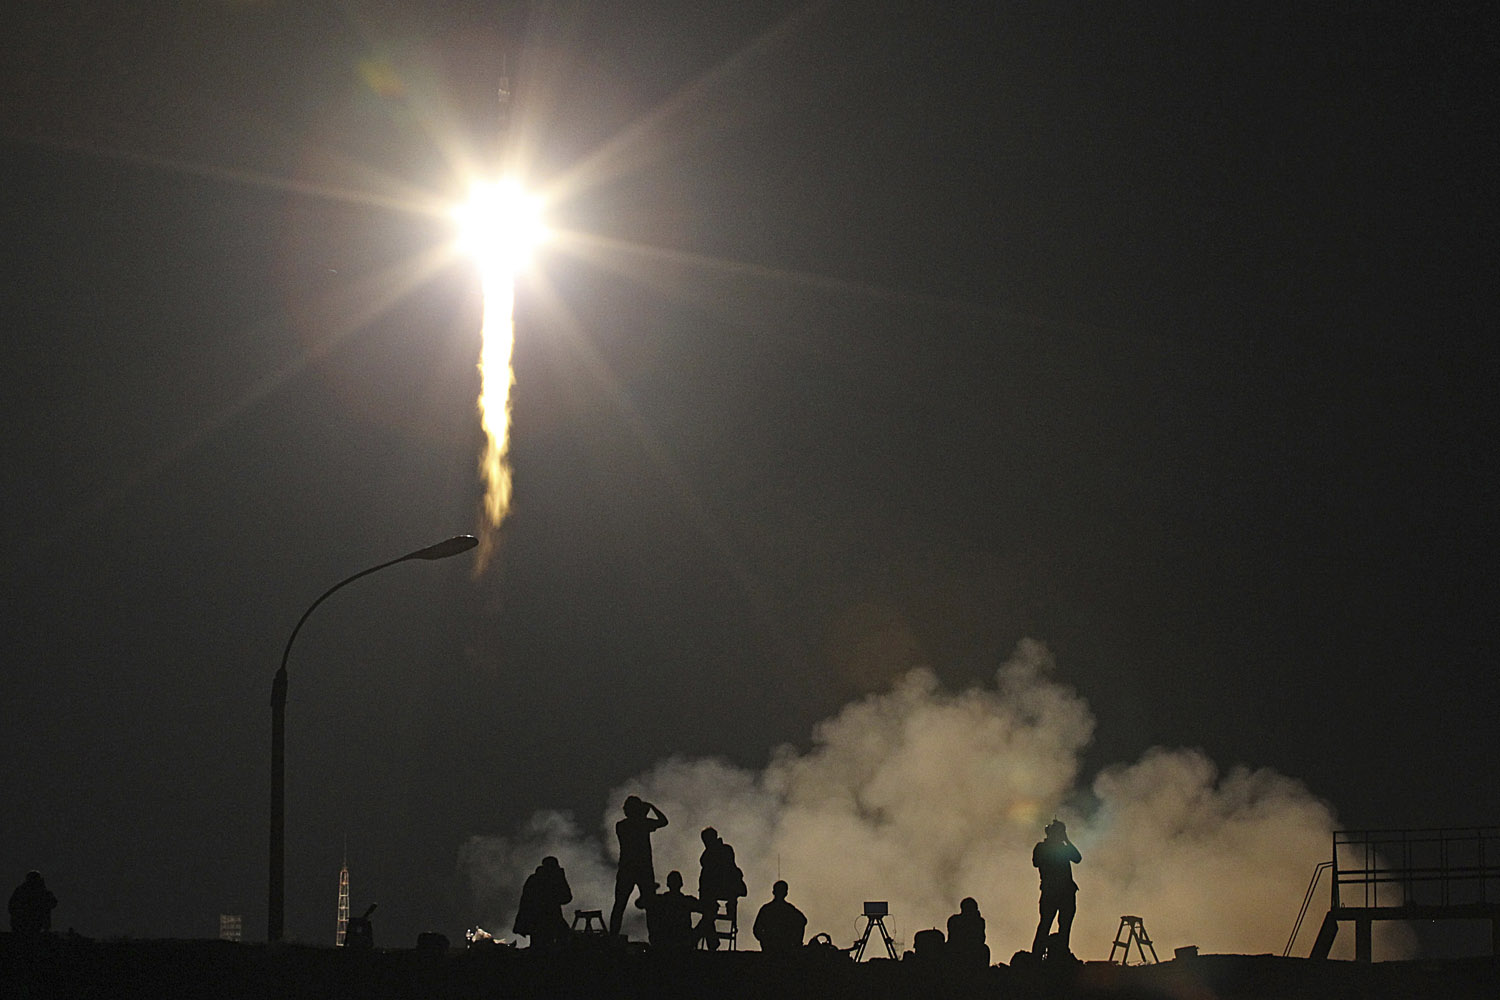 May 29, 2013. Photographers take pictures of the launch of Soyuz-FG rocket booster with Soyuz TMA-09M space ship carrying a new crew to the International Space Station, ISS, as it blasted off at the Russian-leased Baikonur Cosmodrome, Kazakhstan.